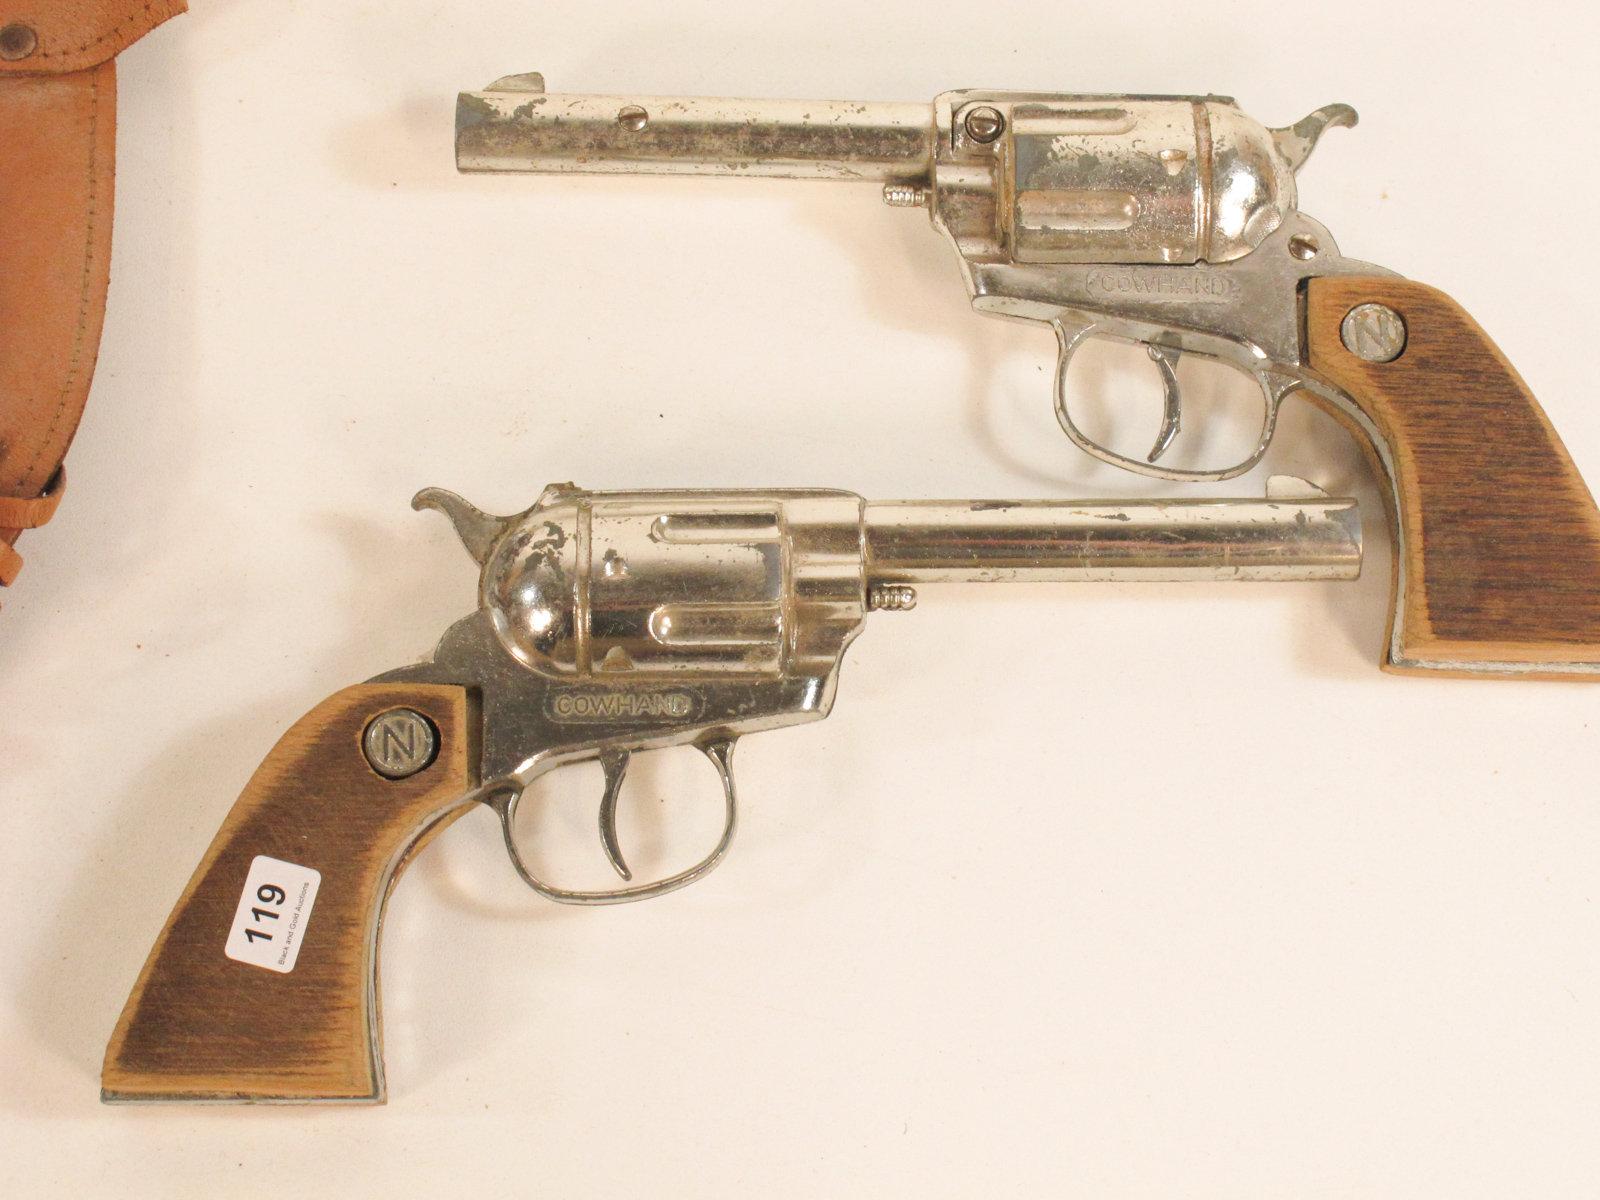 Pair of Cowhand Six Shooters